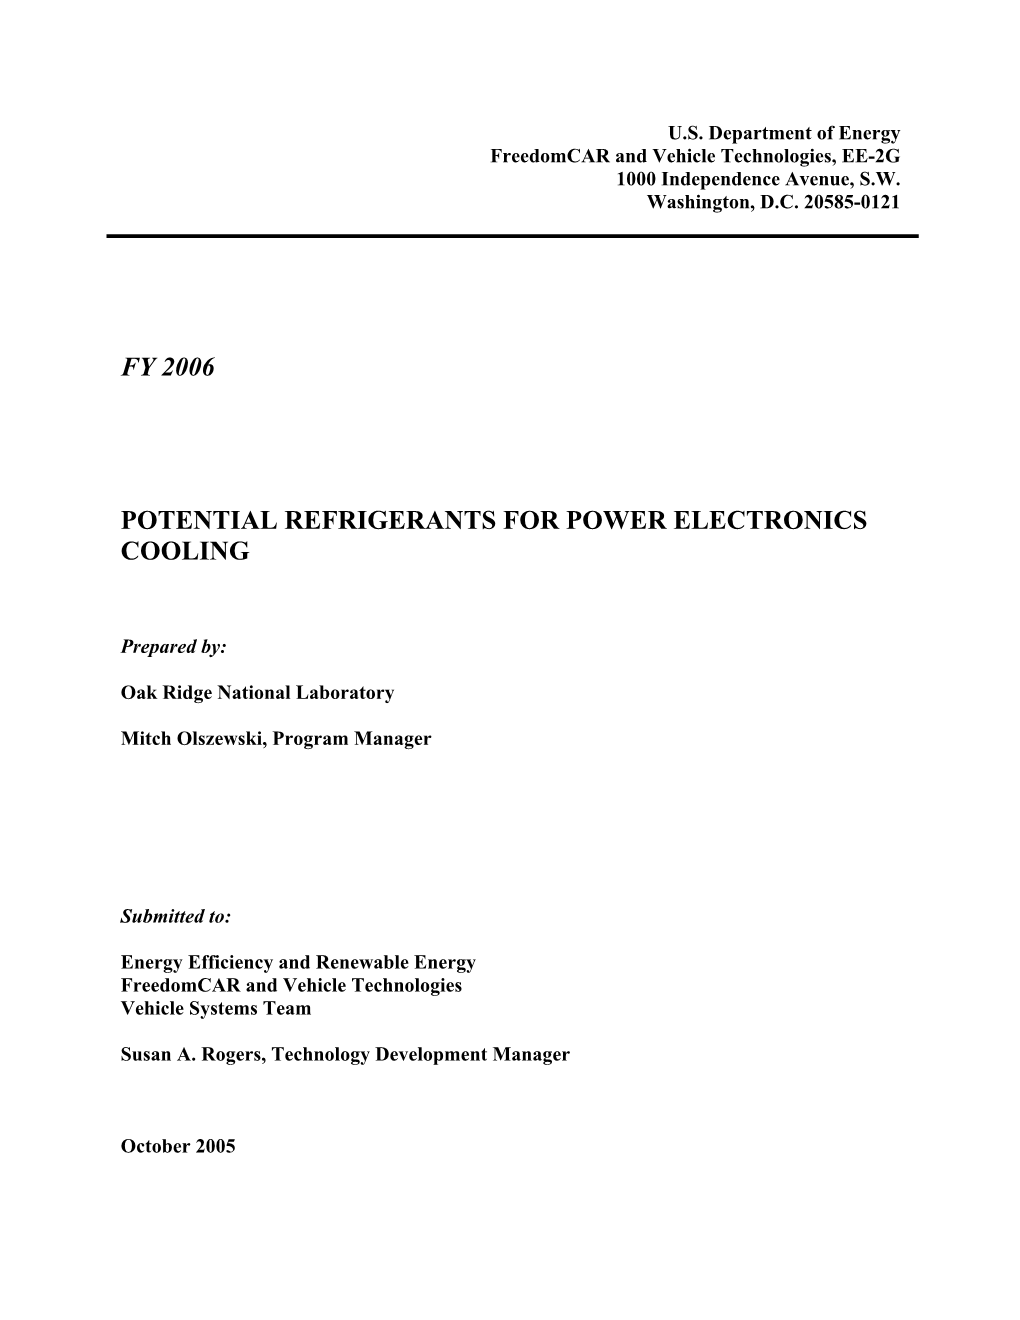 Fy 2006 Potential Refrigerants for Power Electronics Cooling